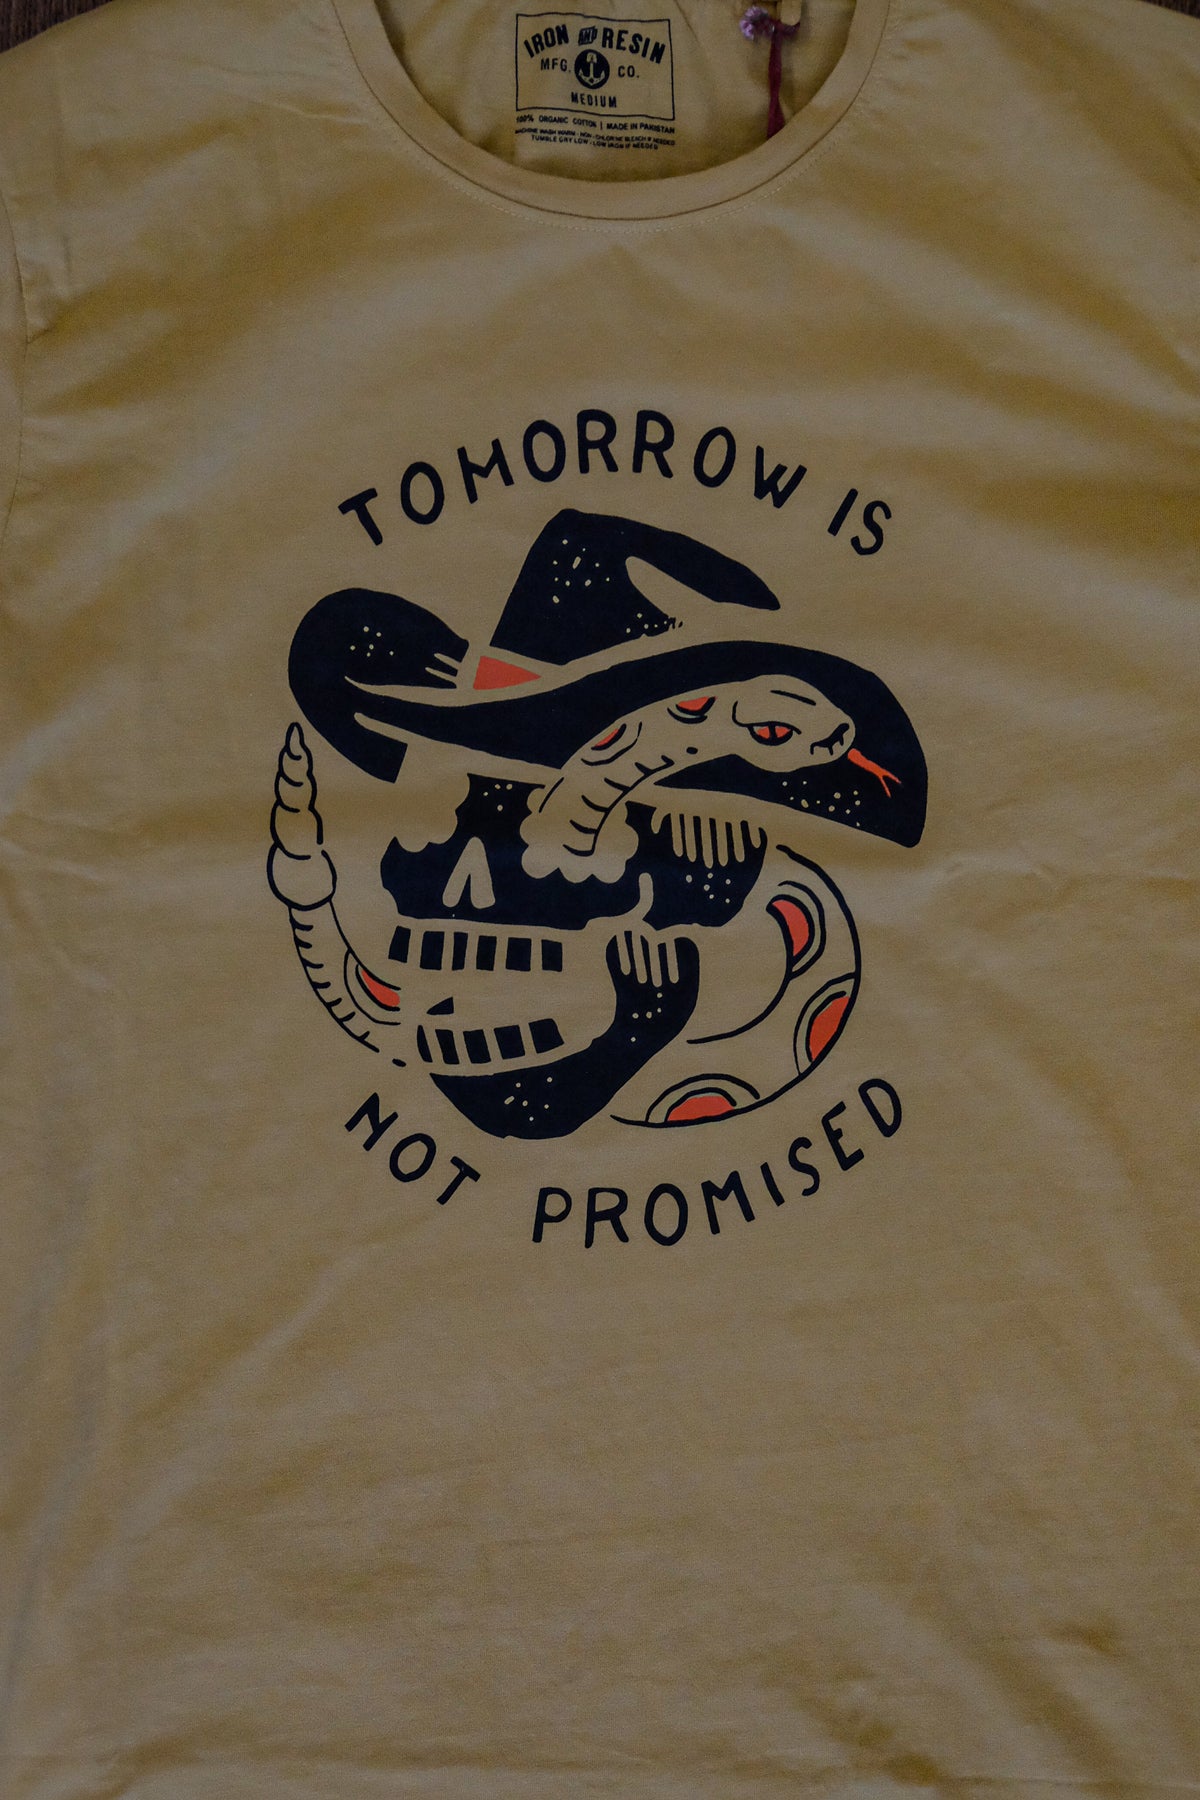 Iron And Resin - Tomorrow is not Promised Tee in Gold